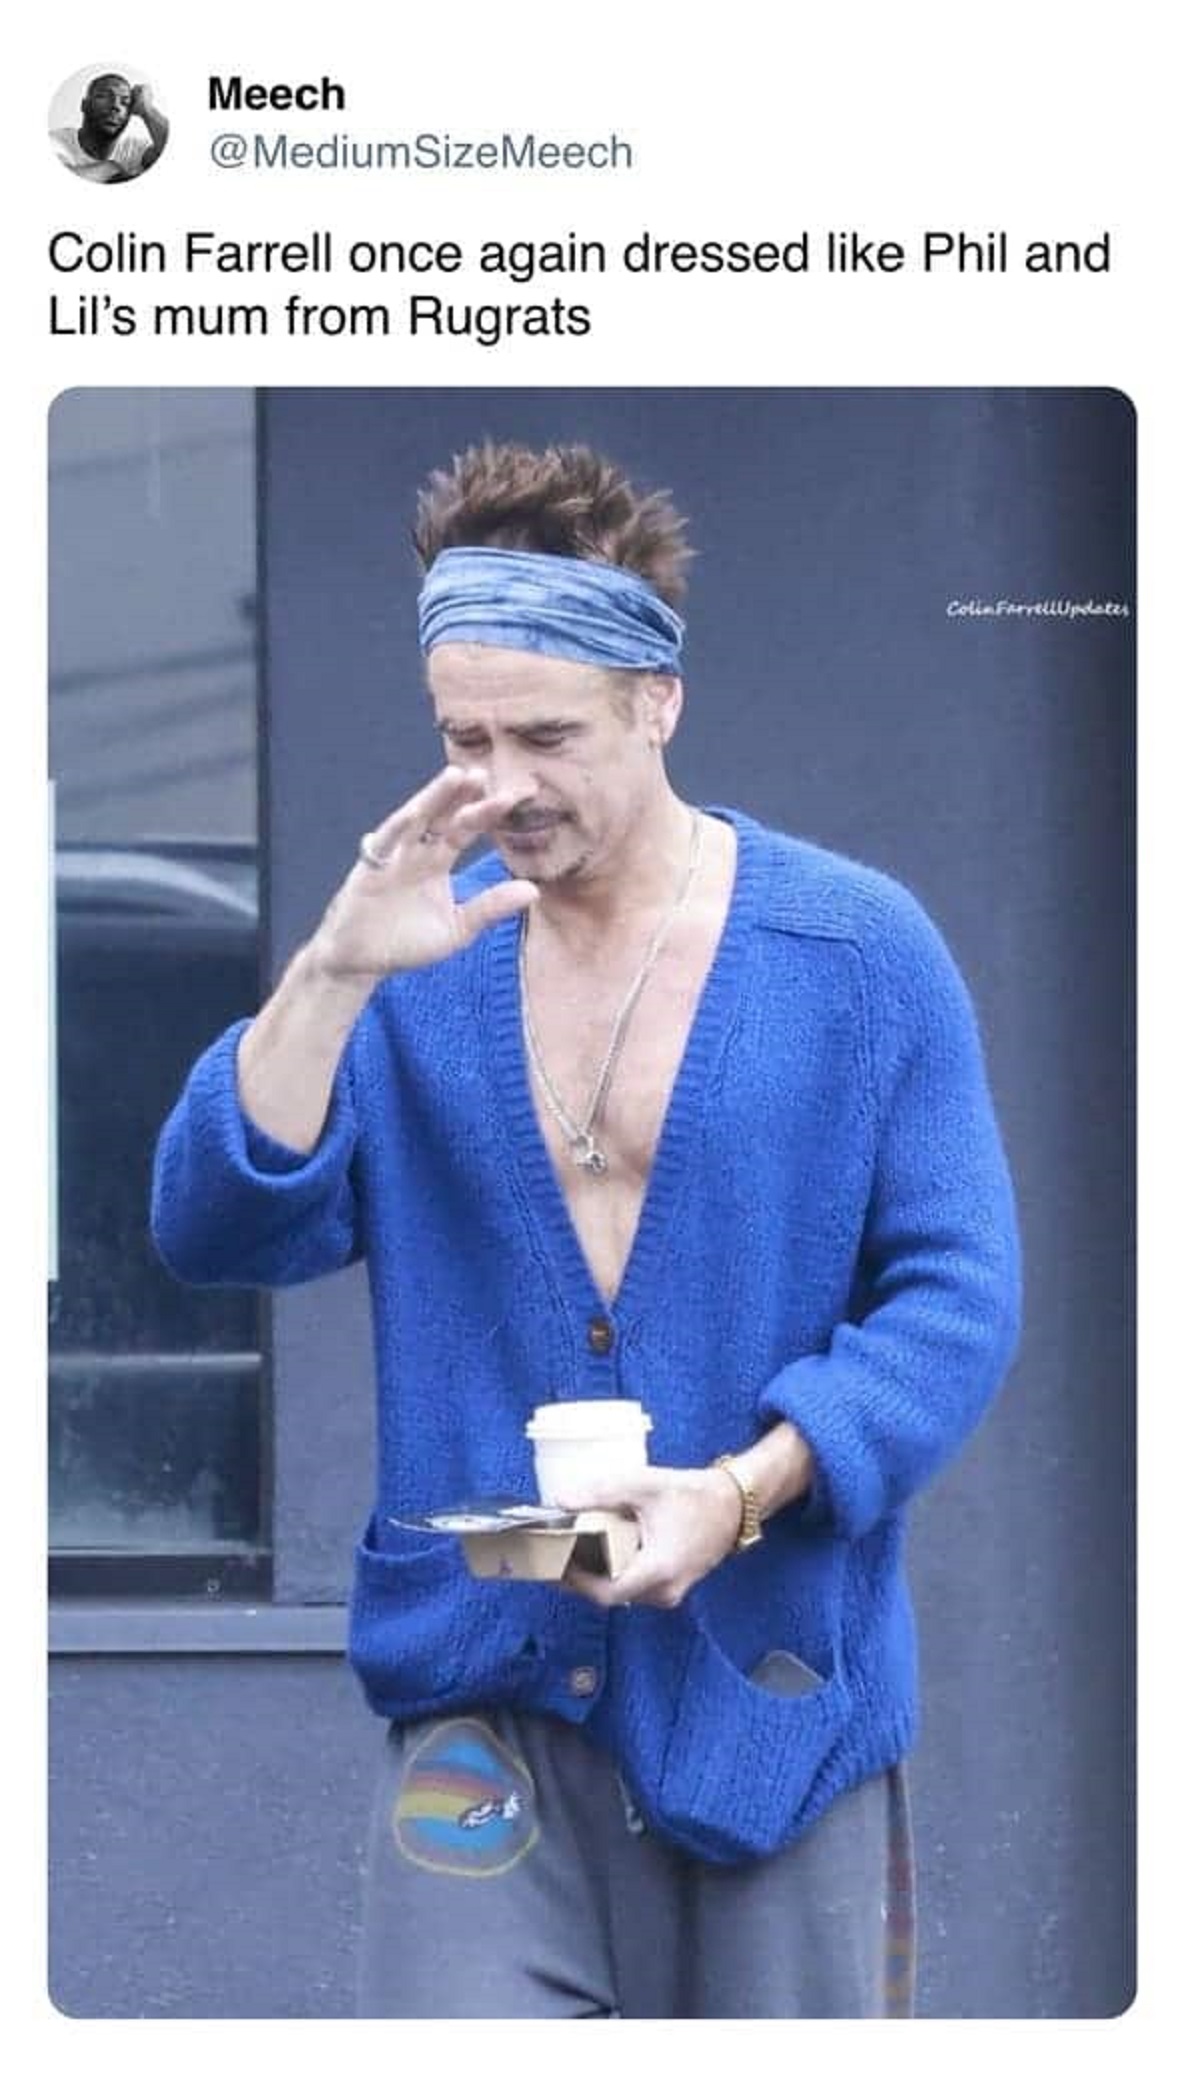 photo caption - Meech SizeMeech Colin Farrell once again dressed Phil and Lil's mum from Rugrats Colin FarrellUpdates